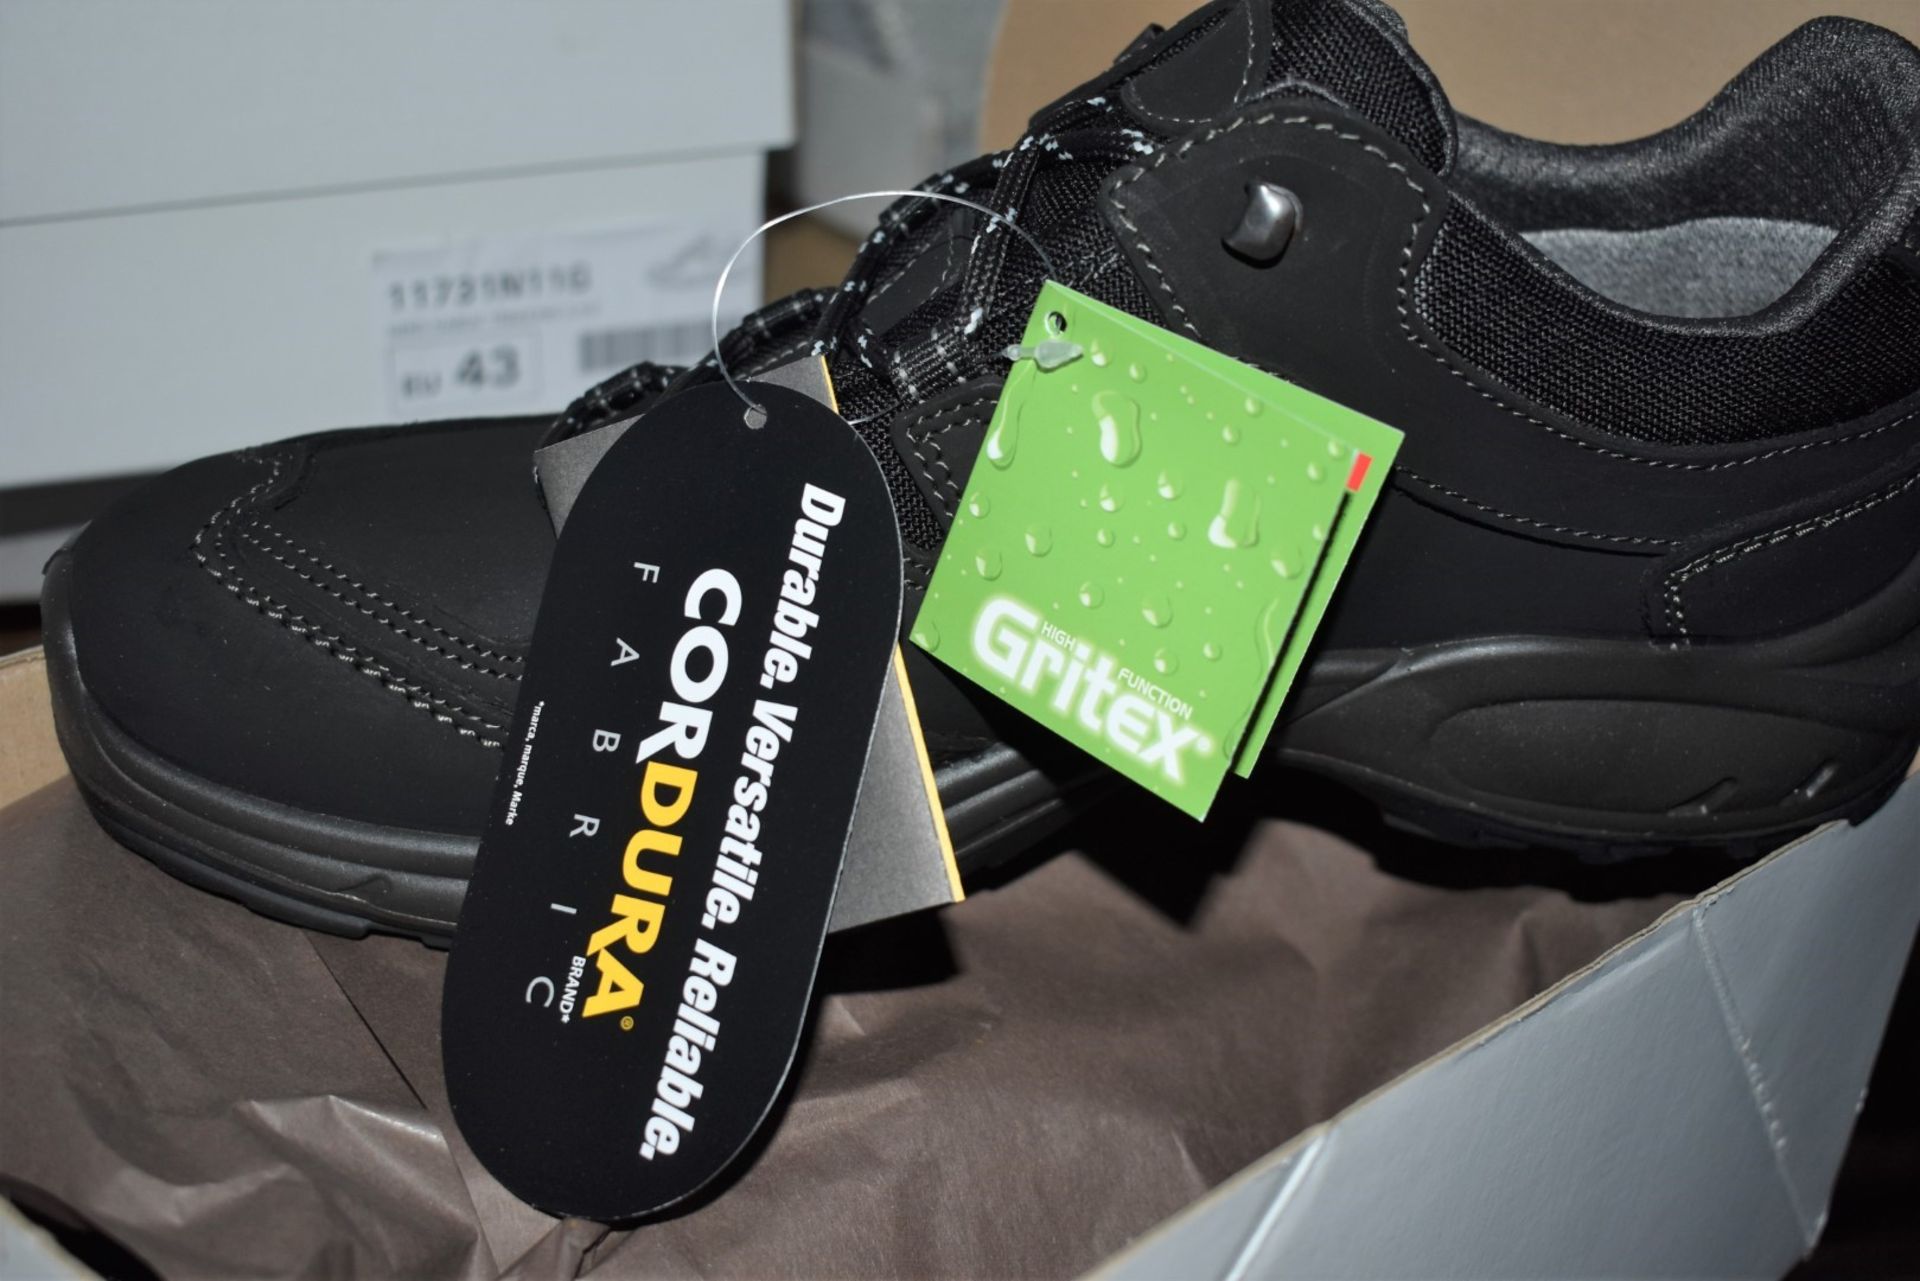 1 x Pair of Mens VIBRAM Walking Shoes - Outdoor GriTex Trekking Shoes With Cordura Fabric - Made - Image 4 of 5